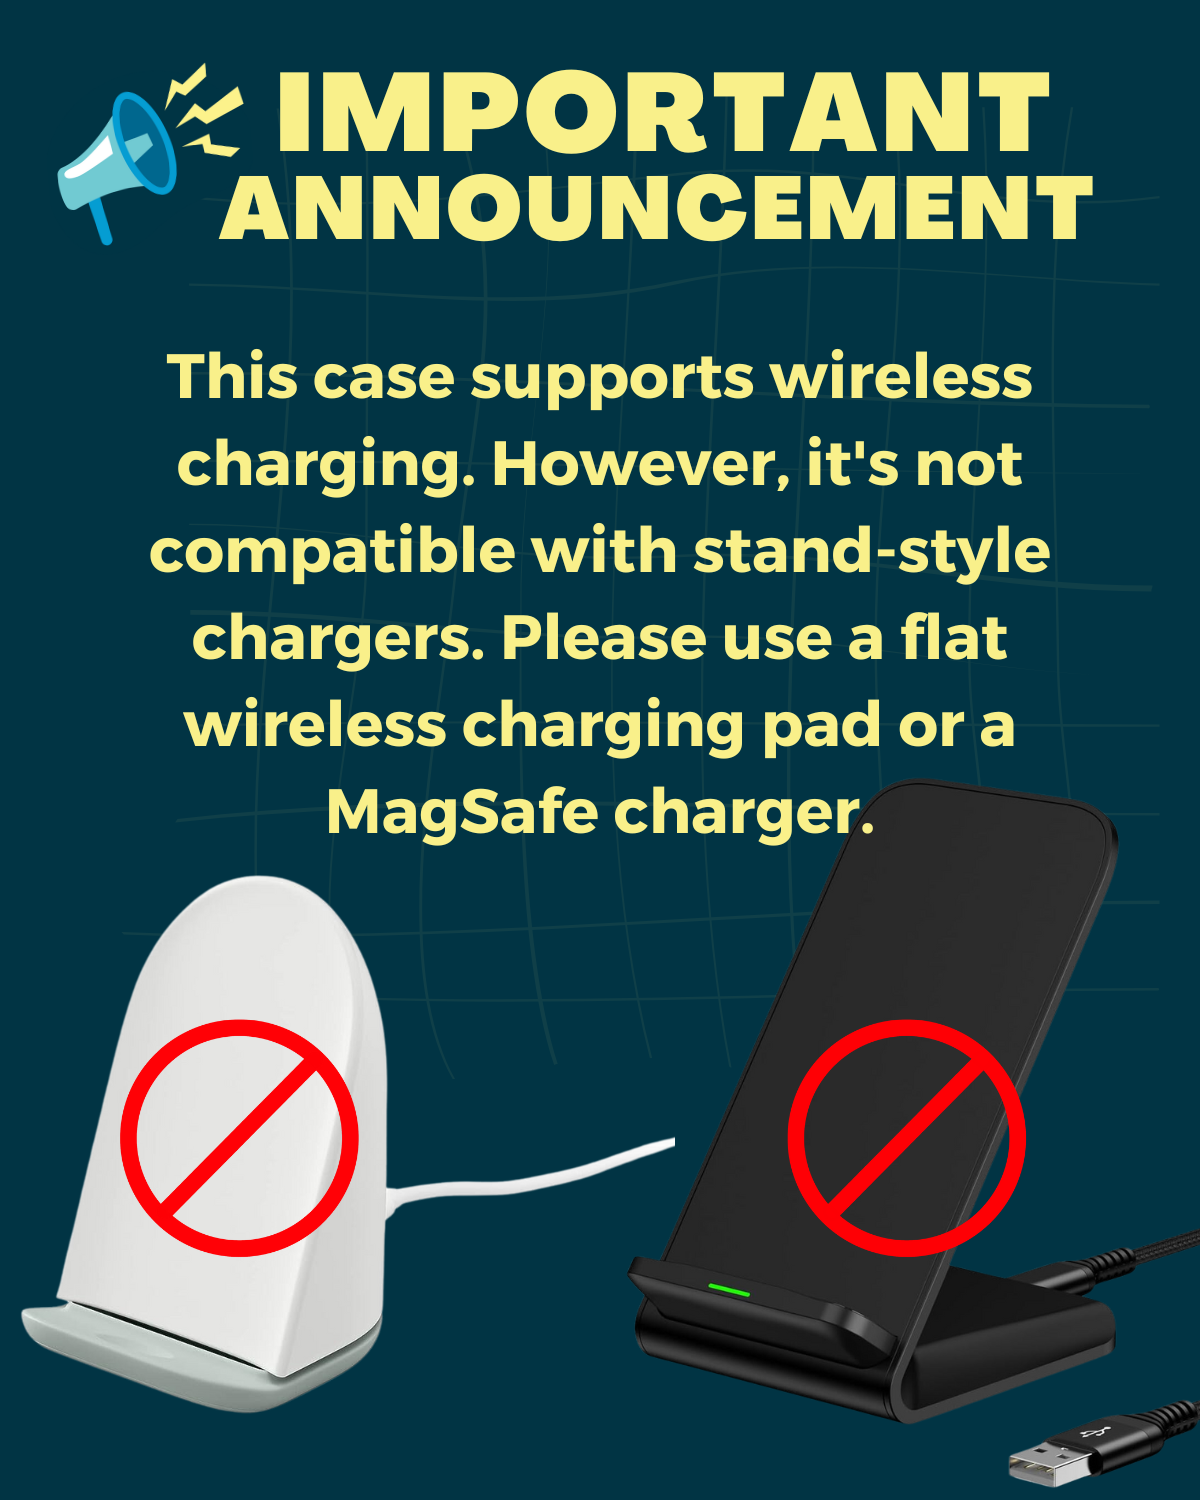 Super Thin Galaxy S24 Ultra Case Wireless Charging Announcement